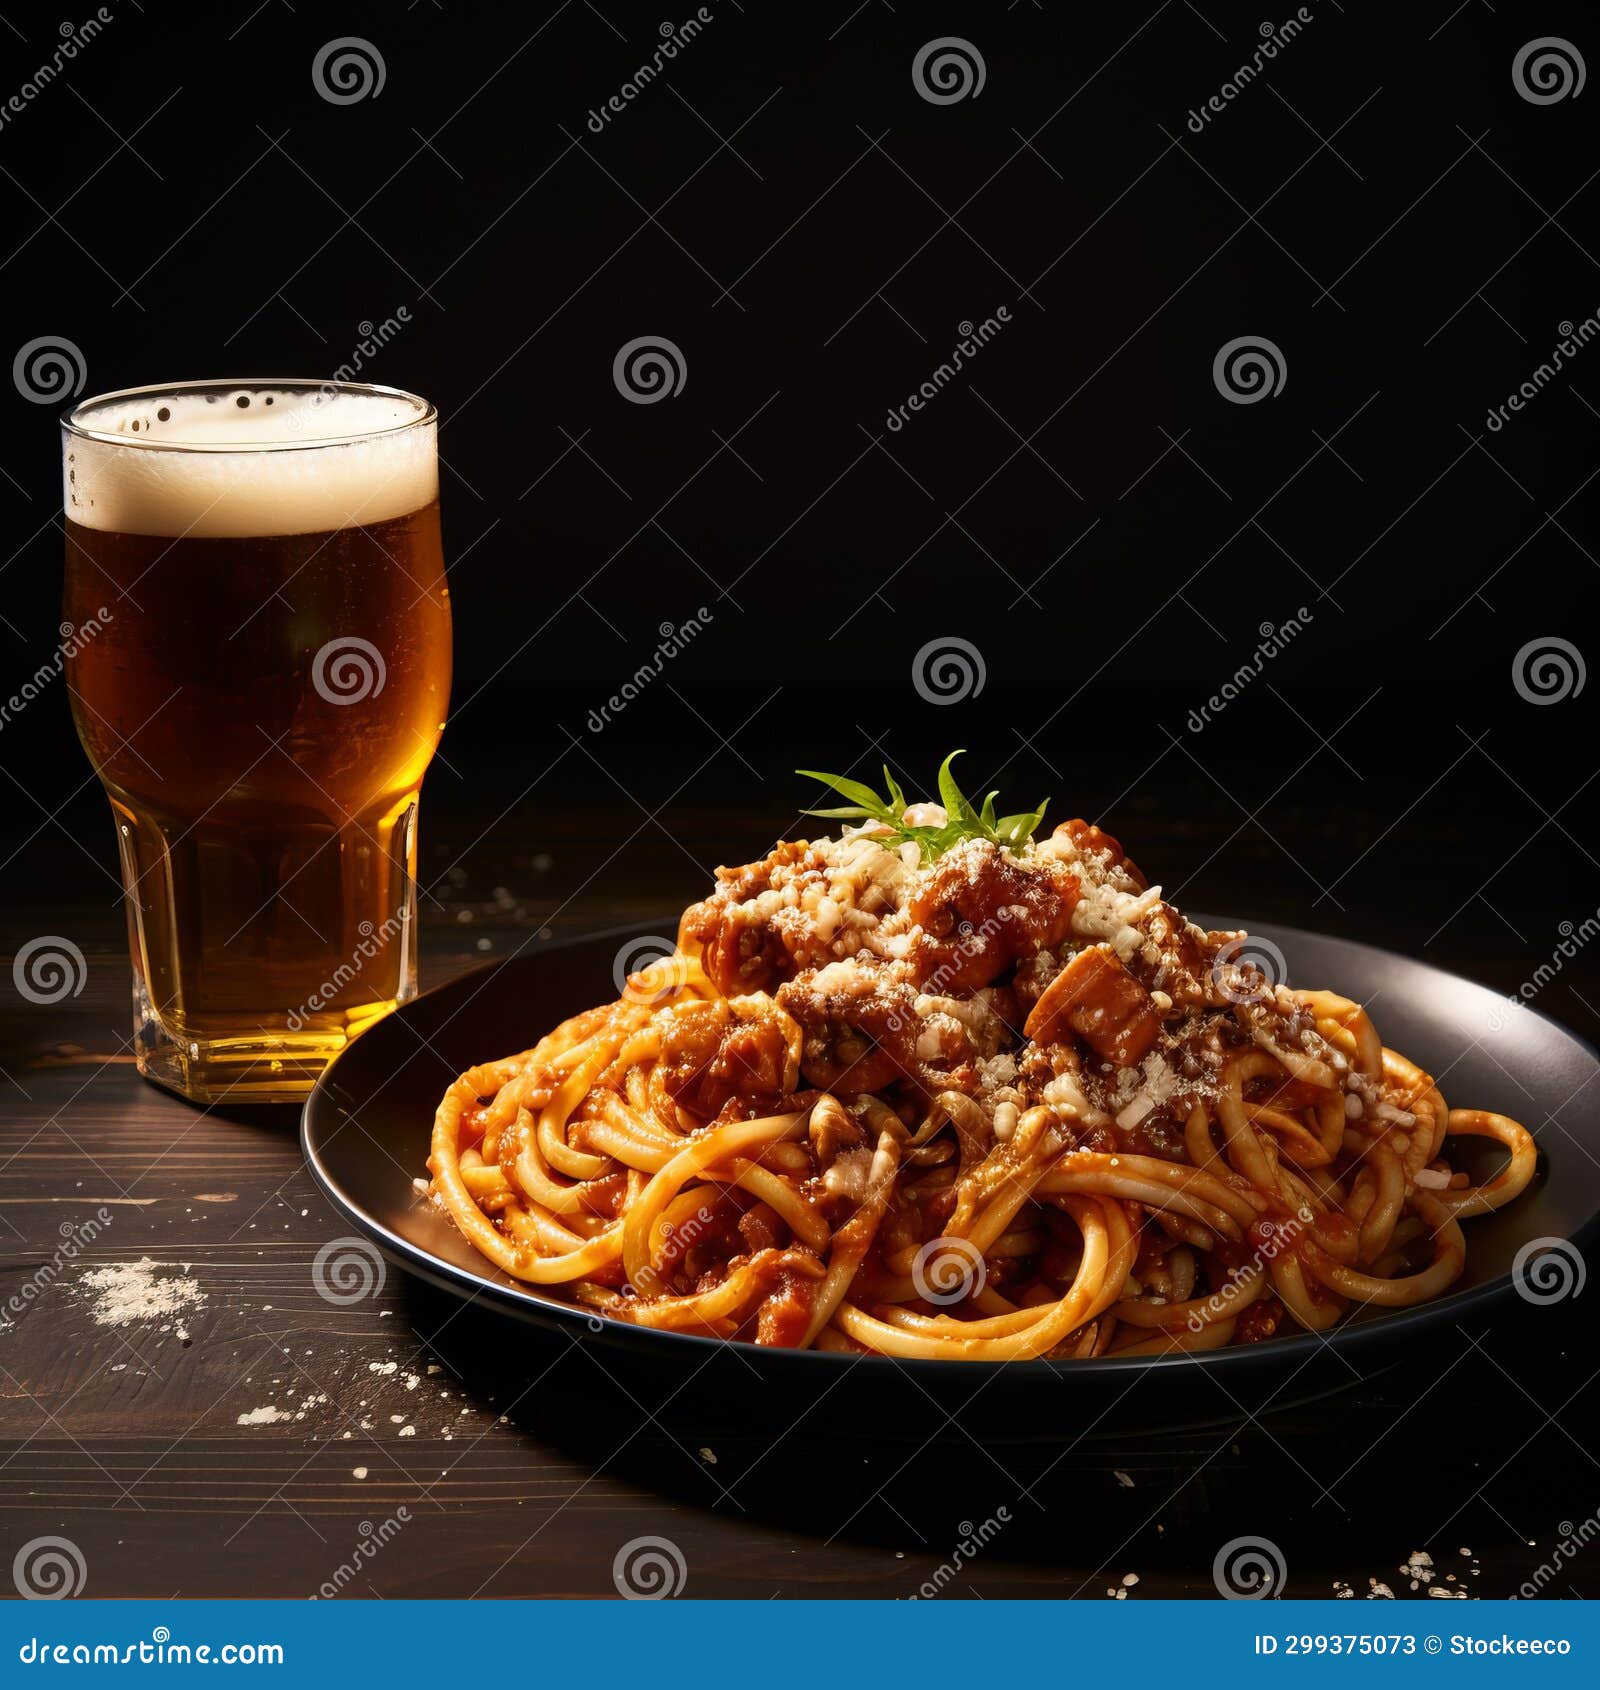 pop-culture infused spaghetti with ground beef and a glass of beer